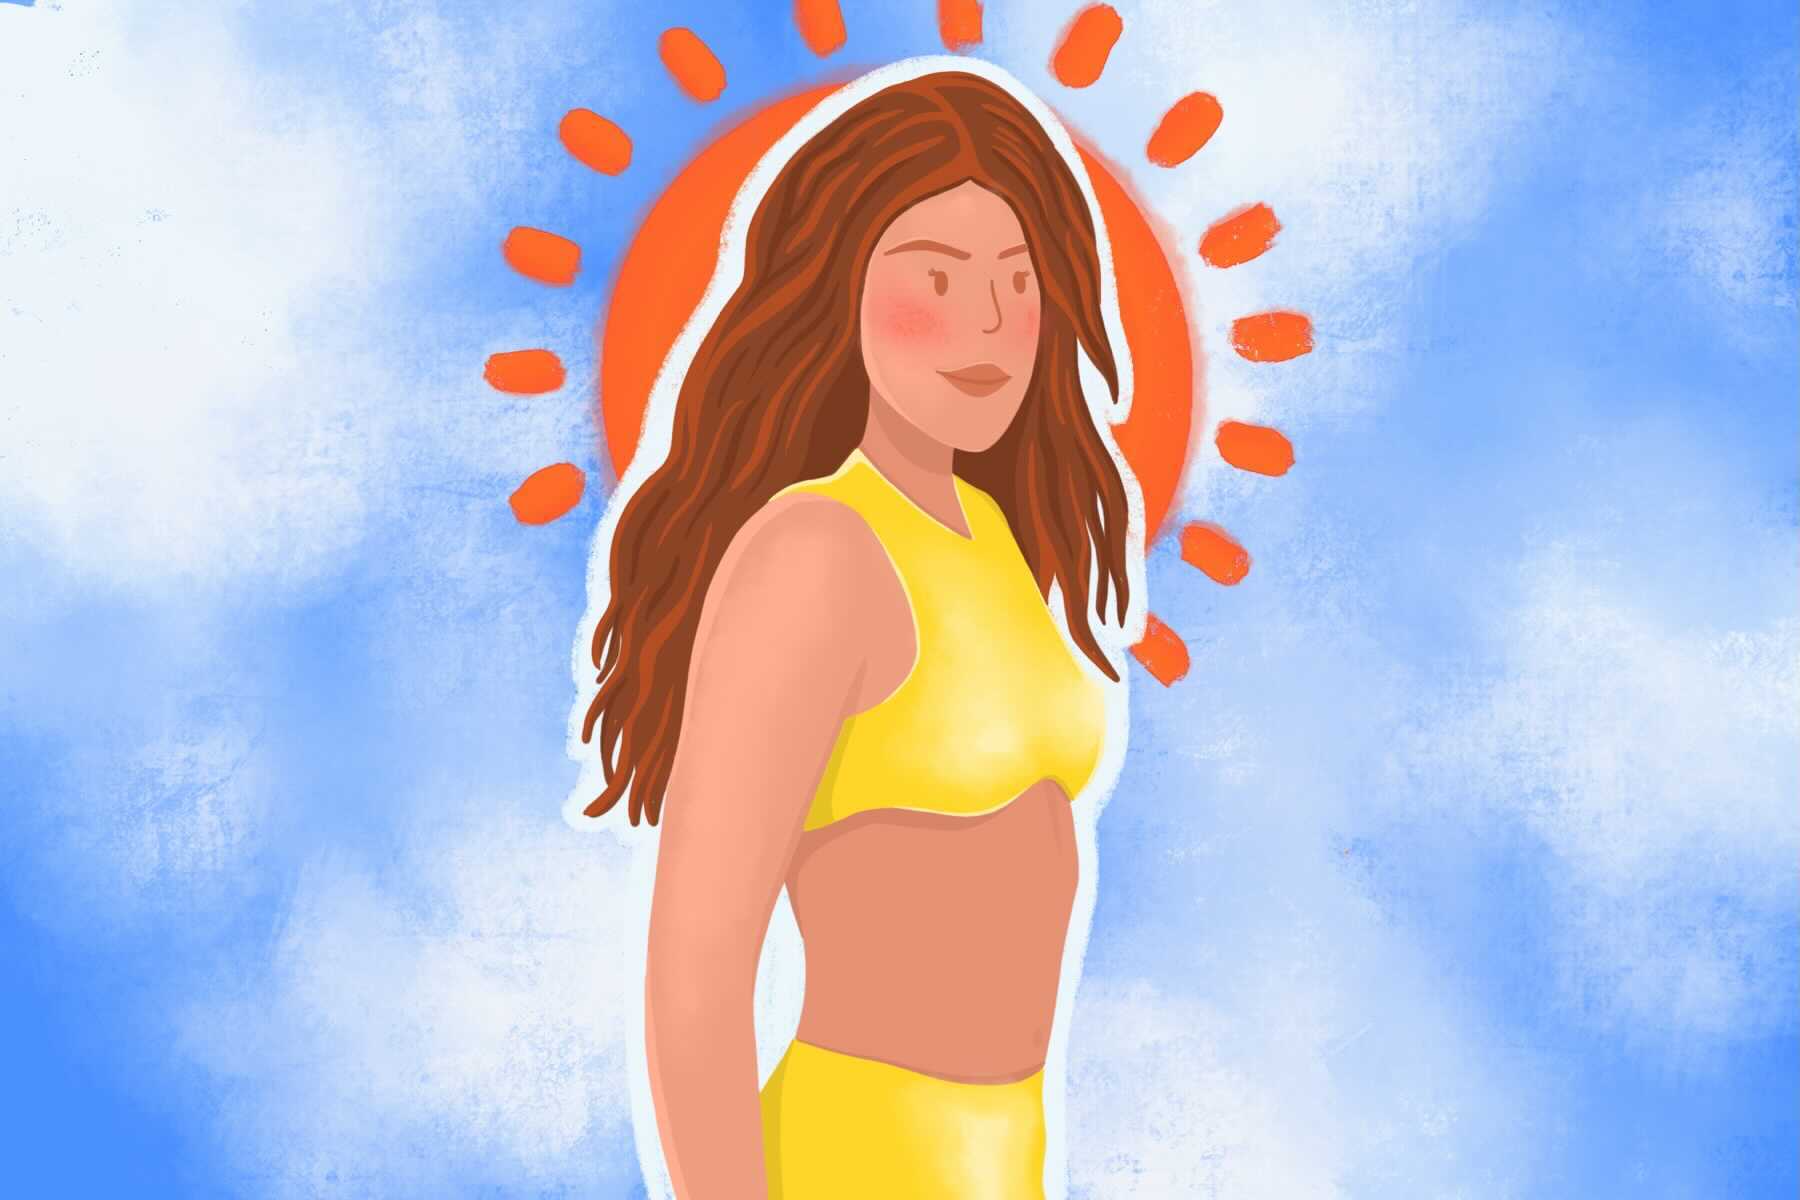 An illustration of Lorde from the Solar Power music video. (Illustration by Katelyn McManis, Columbia College Chicago)